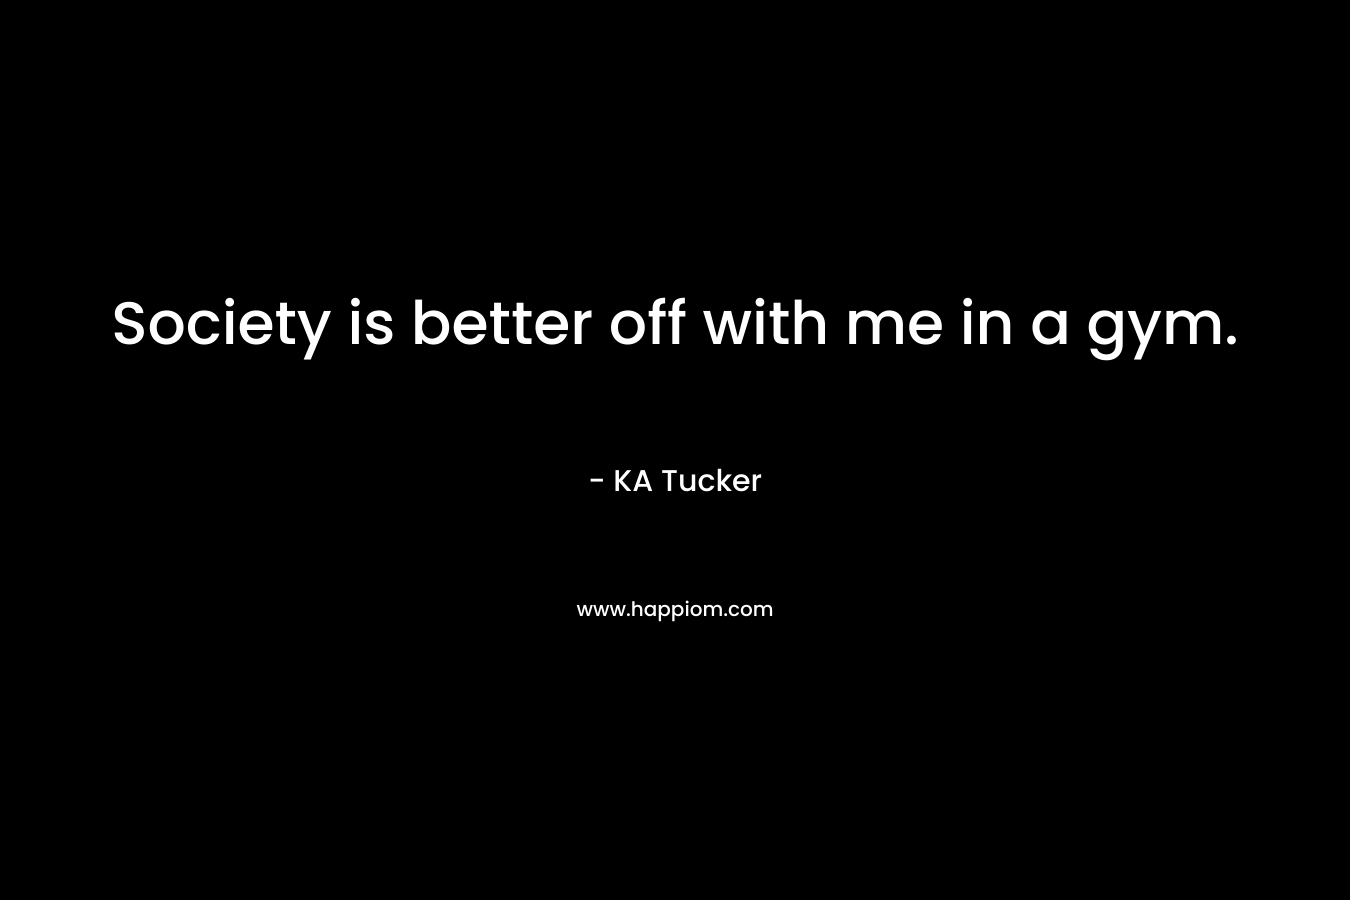 Society is better off with me in a gym. – KA Tucker